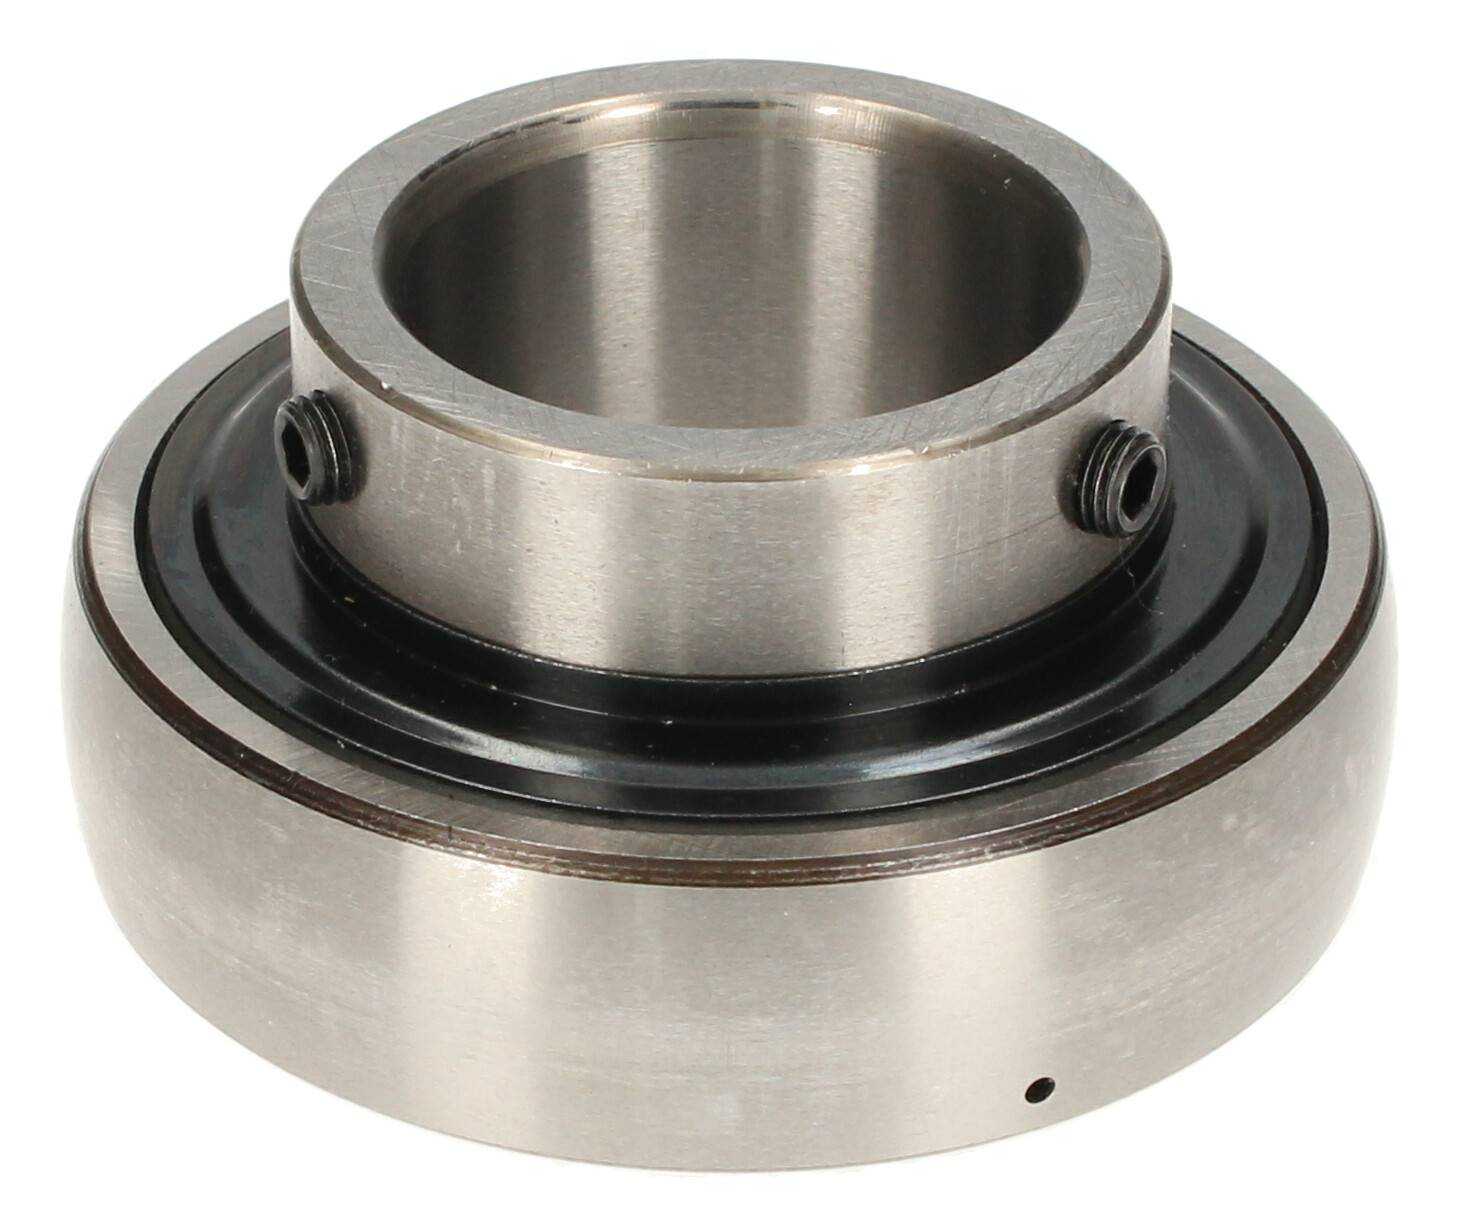 YAR-204-2F INSERTABLE BALL BEARING-SKF (WITHOUT PACKAGING)